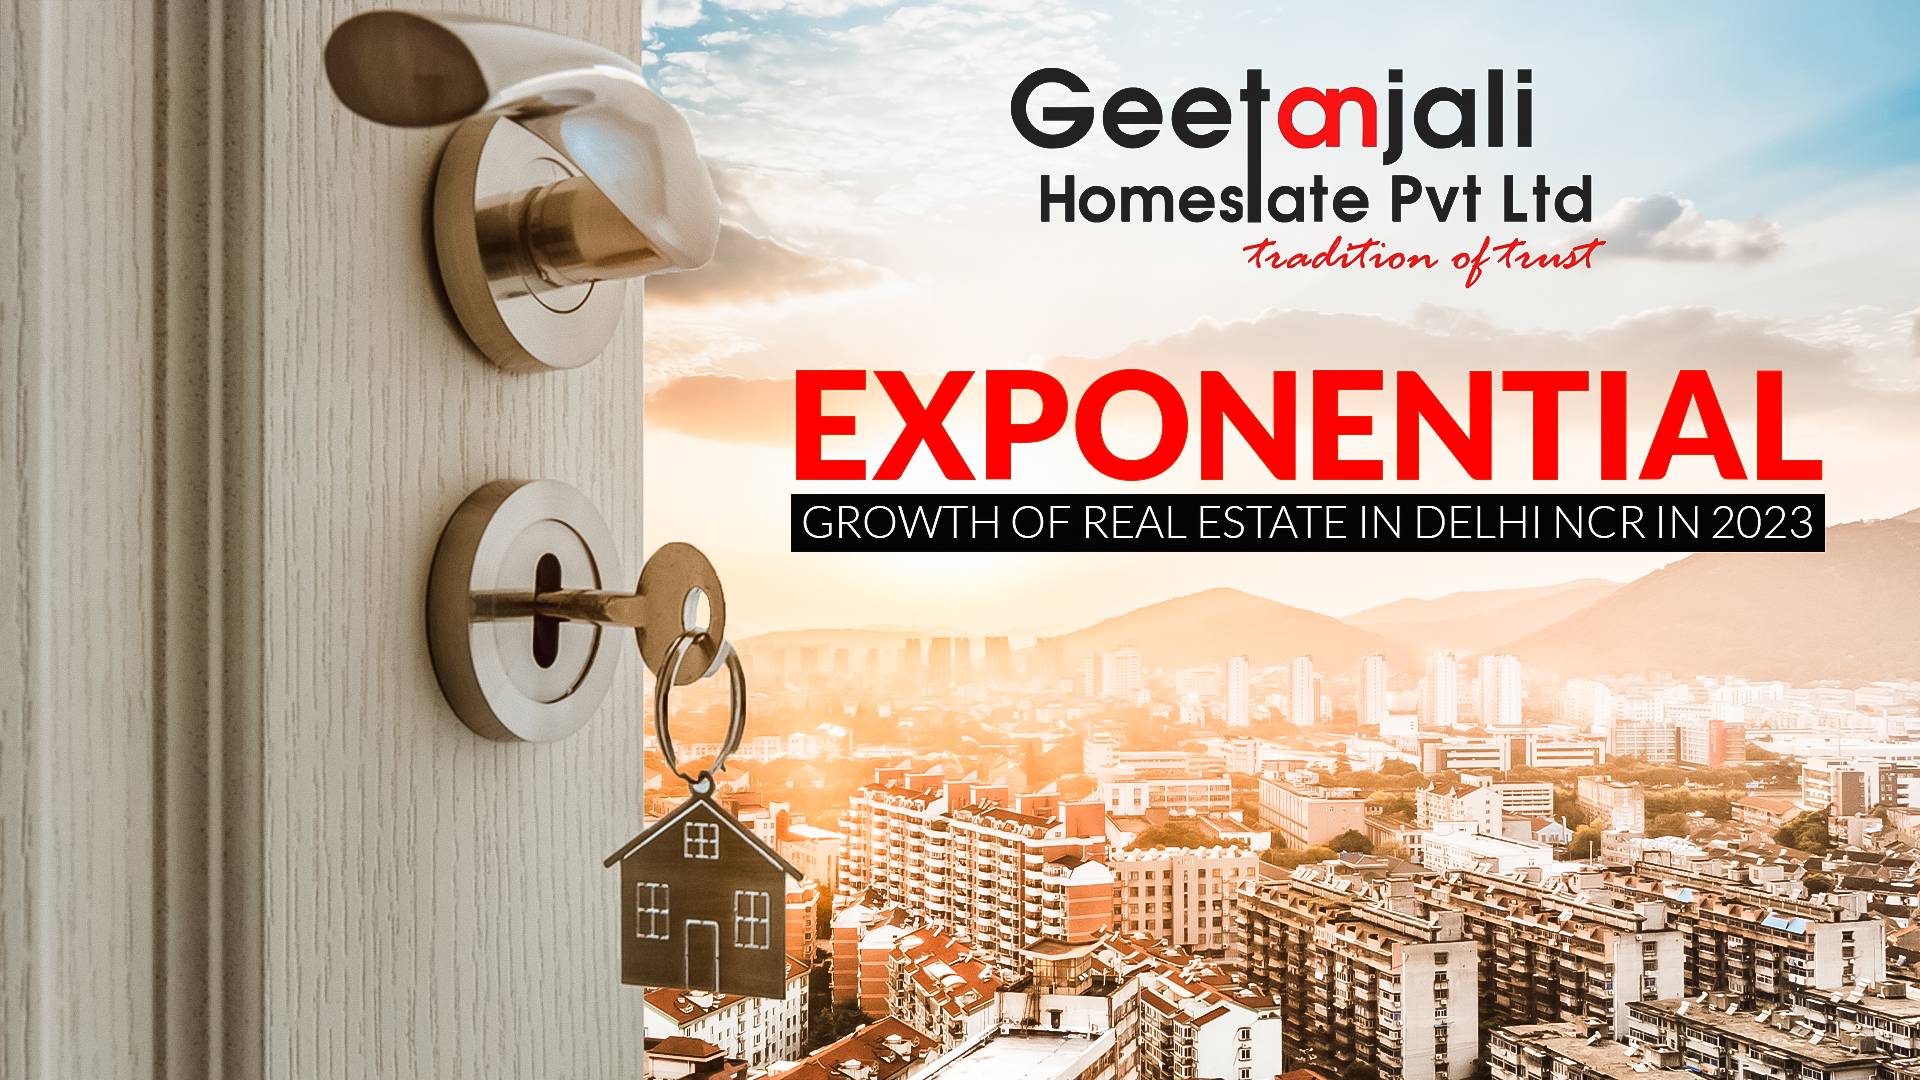 Exponential Growth of Real Estate in Delhi NCR in 2023